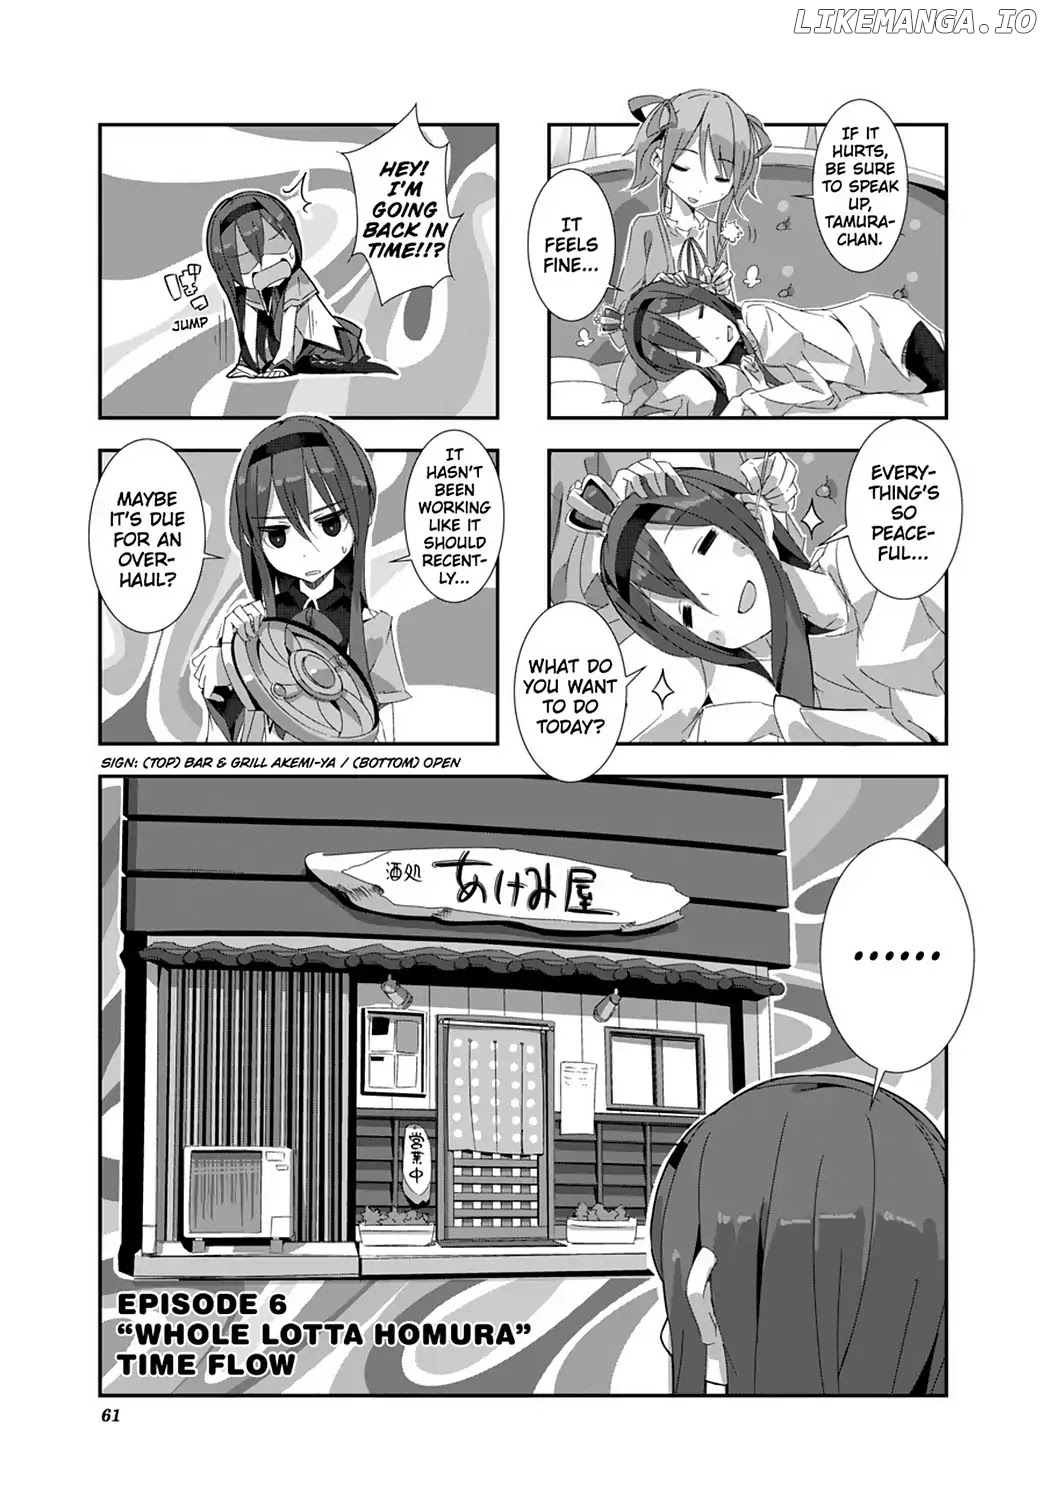 Puella Magi Homura Tamura ~Parallel Worlds Do Not Remain Parallel Forever~ chapter 6 - page 1